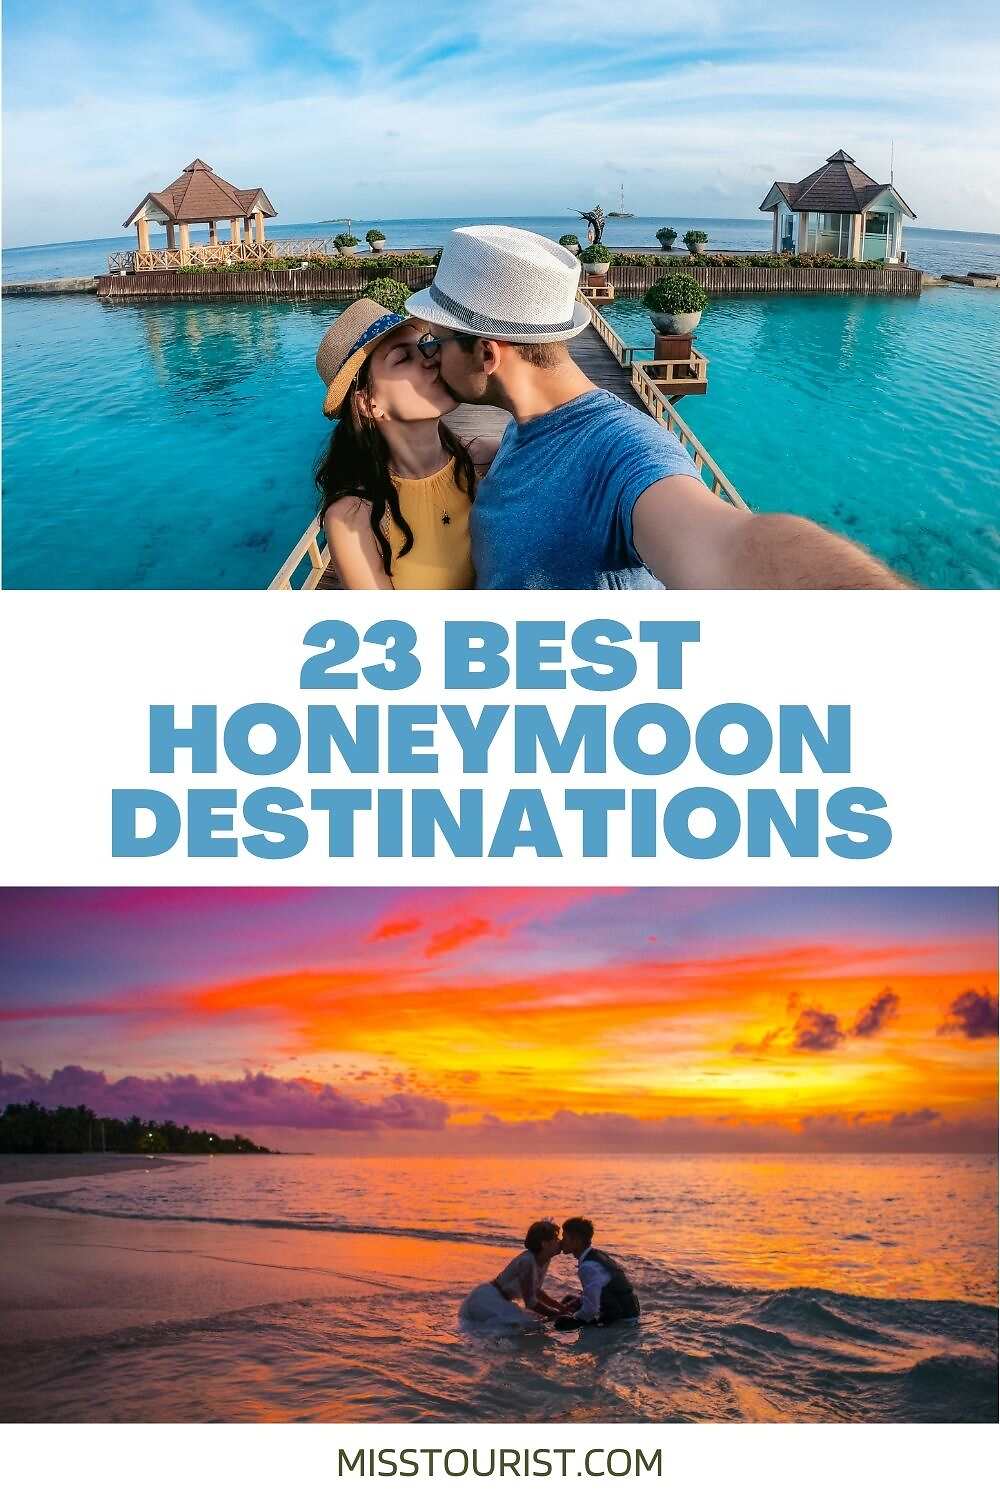 A couple kisses on an overwater bungalow in the top image, while in the bottom image, a couple with a child enjoy a sunset on the beach. Text reads 